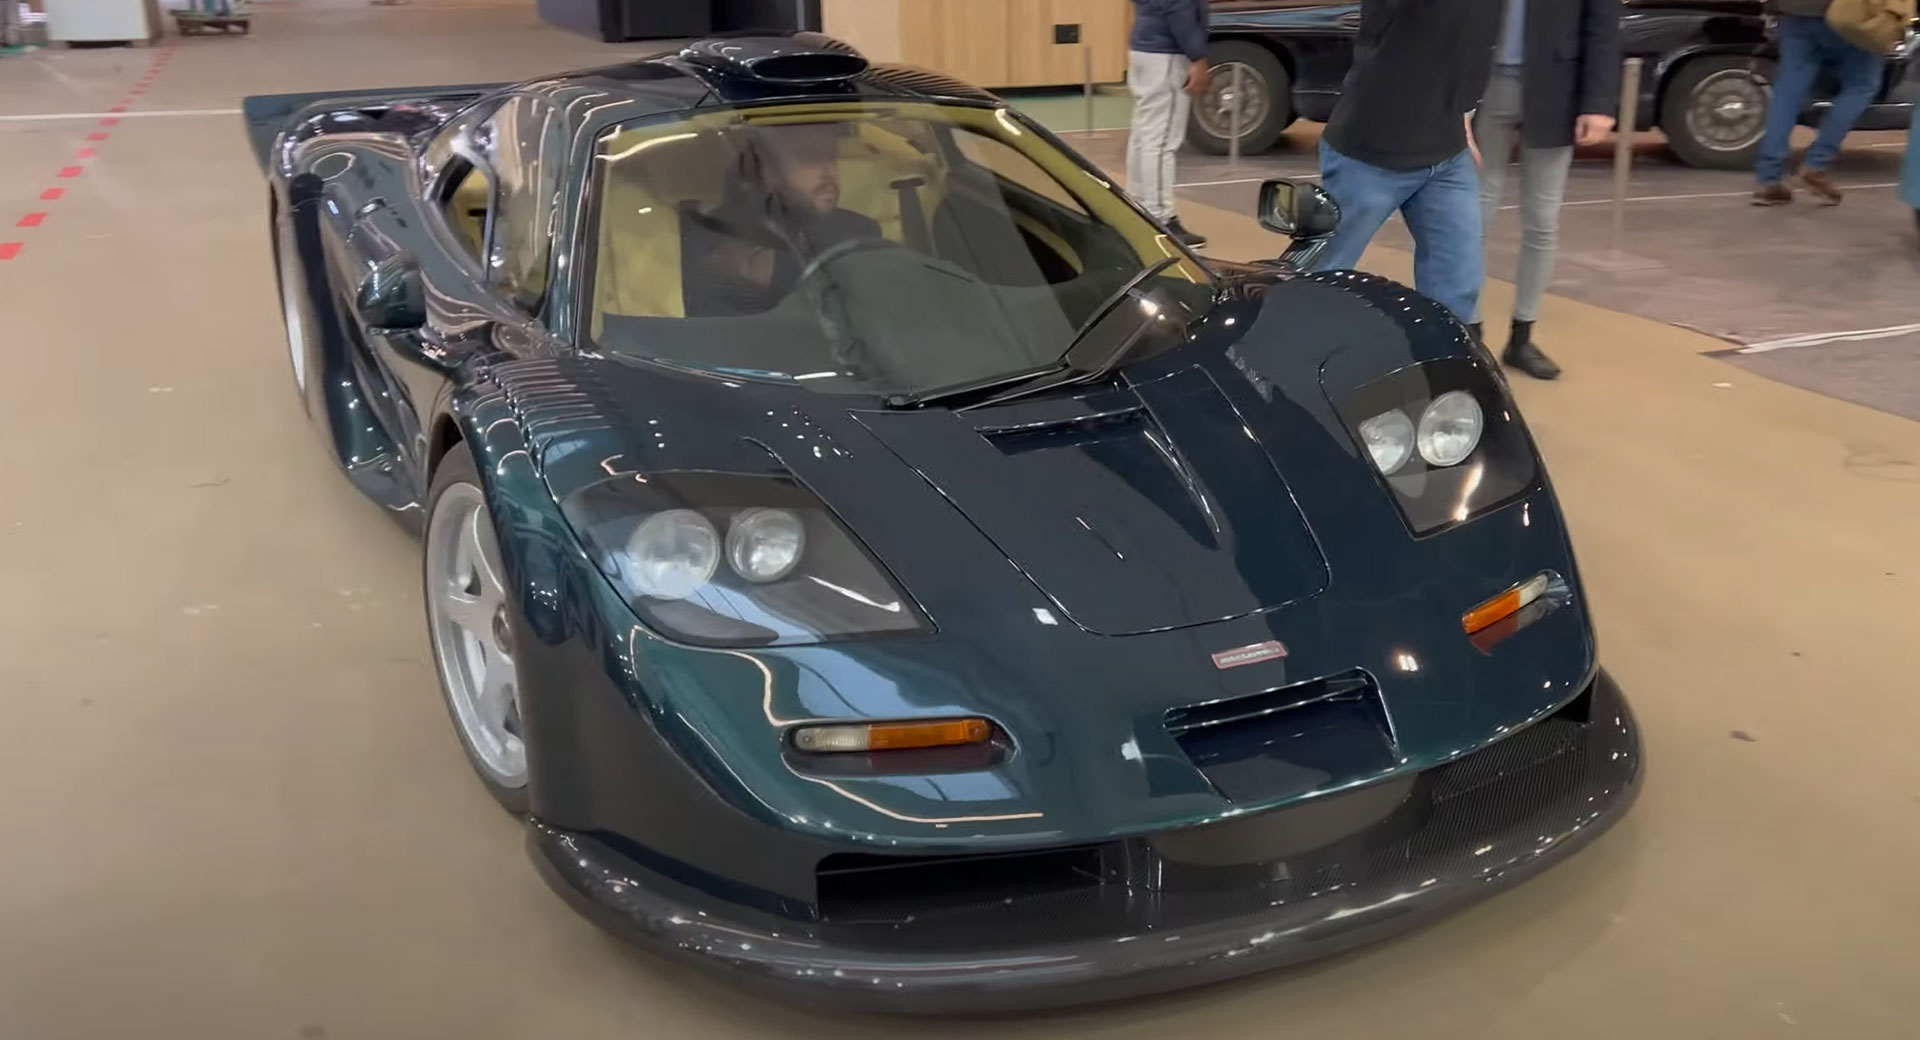 McLaren F1 Was the Most Expensive Car at Auction in 2021